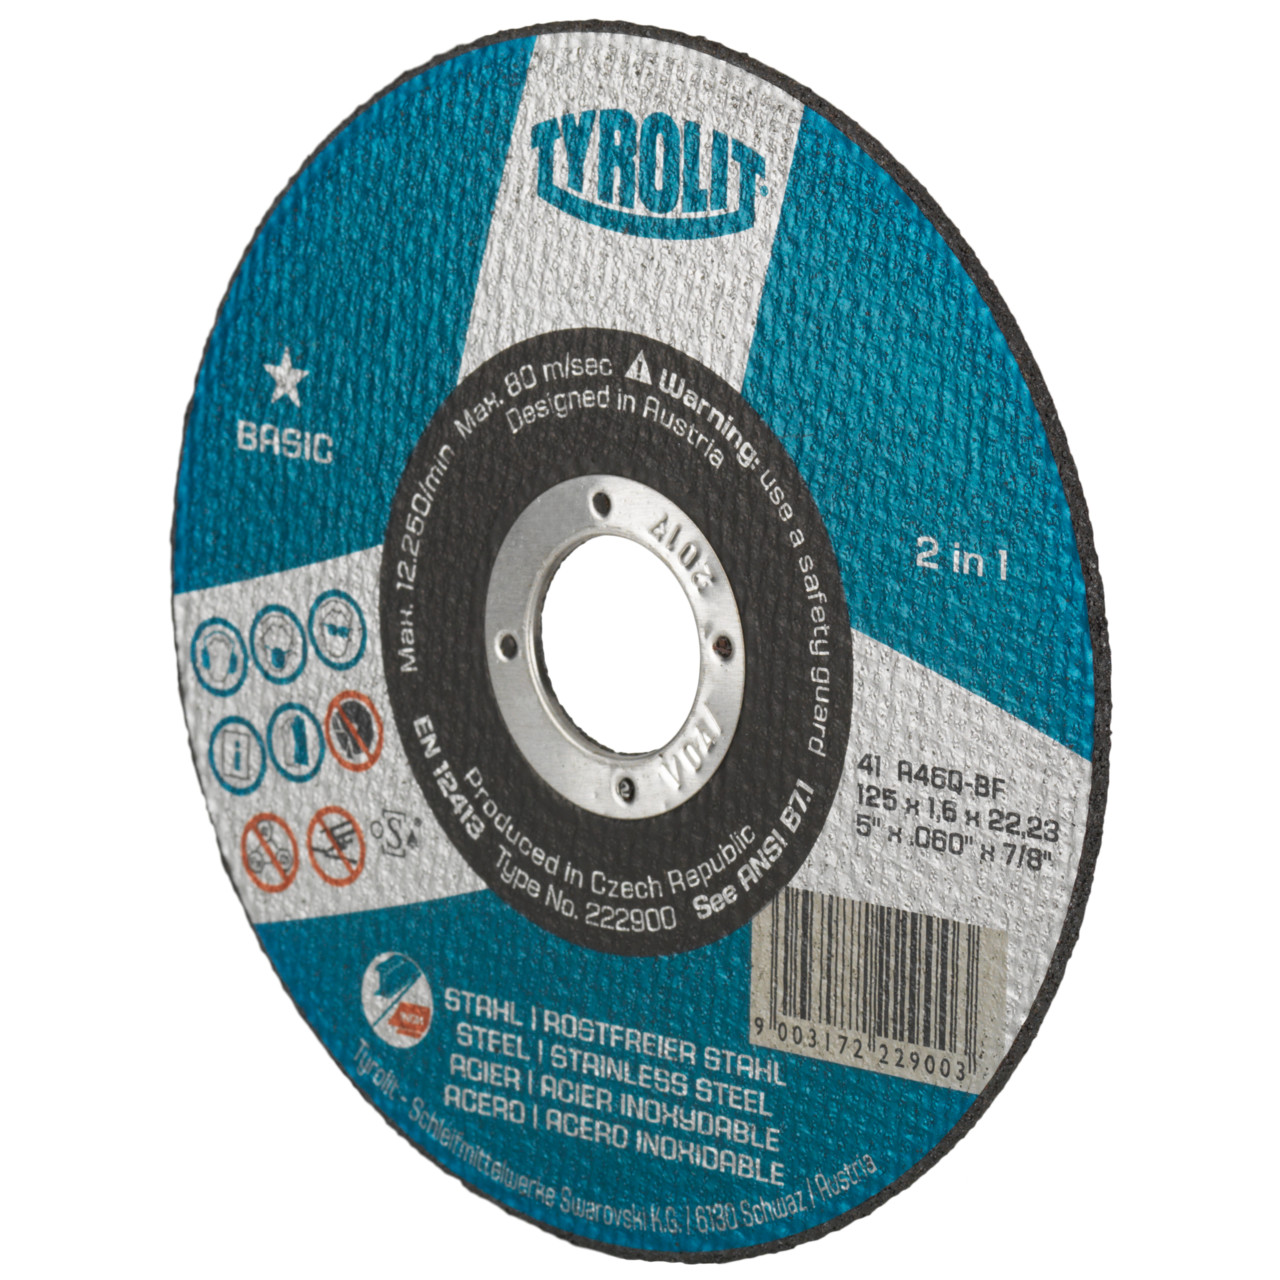 Tyrolit Cutting discs DxDxH 230x2.0x22.23 2in1 for steel and stainless steel, shape: 41 - straight version, Art. 34332877